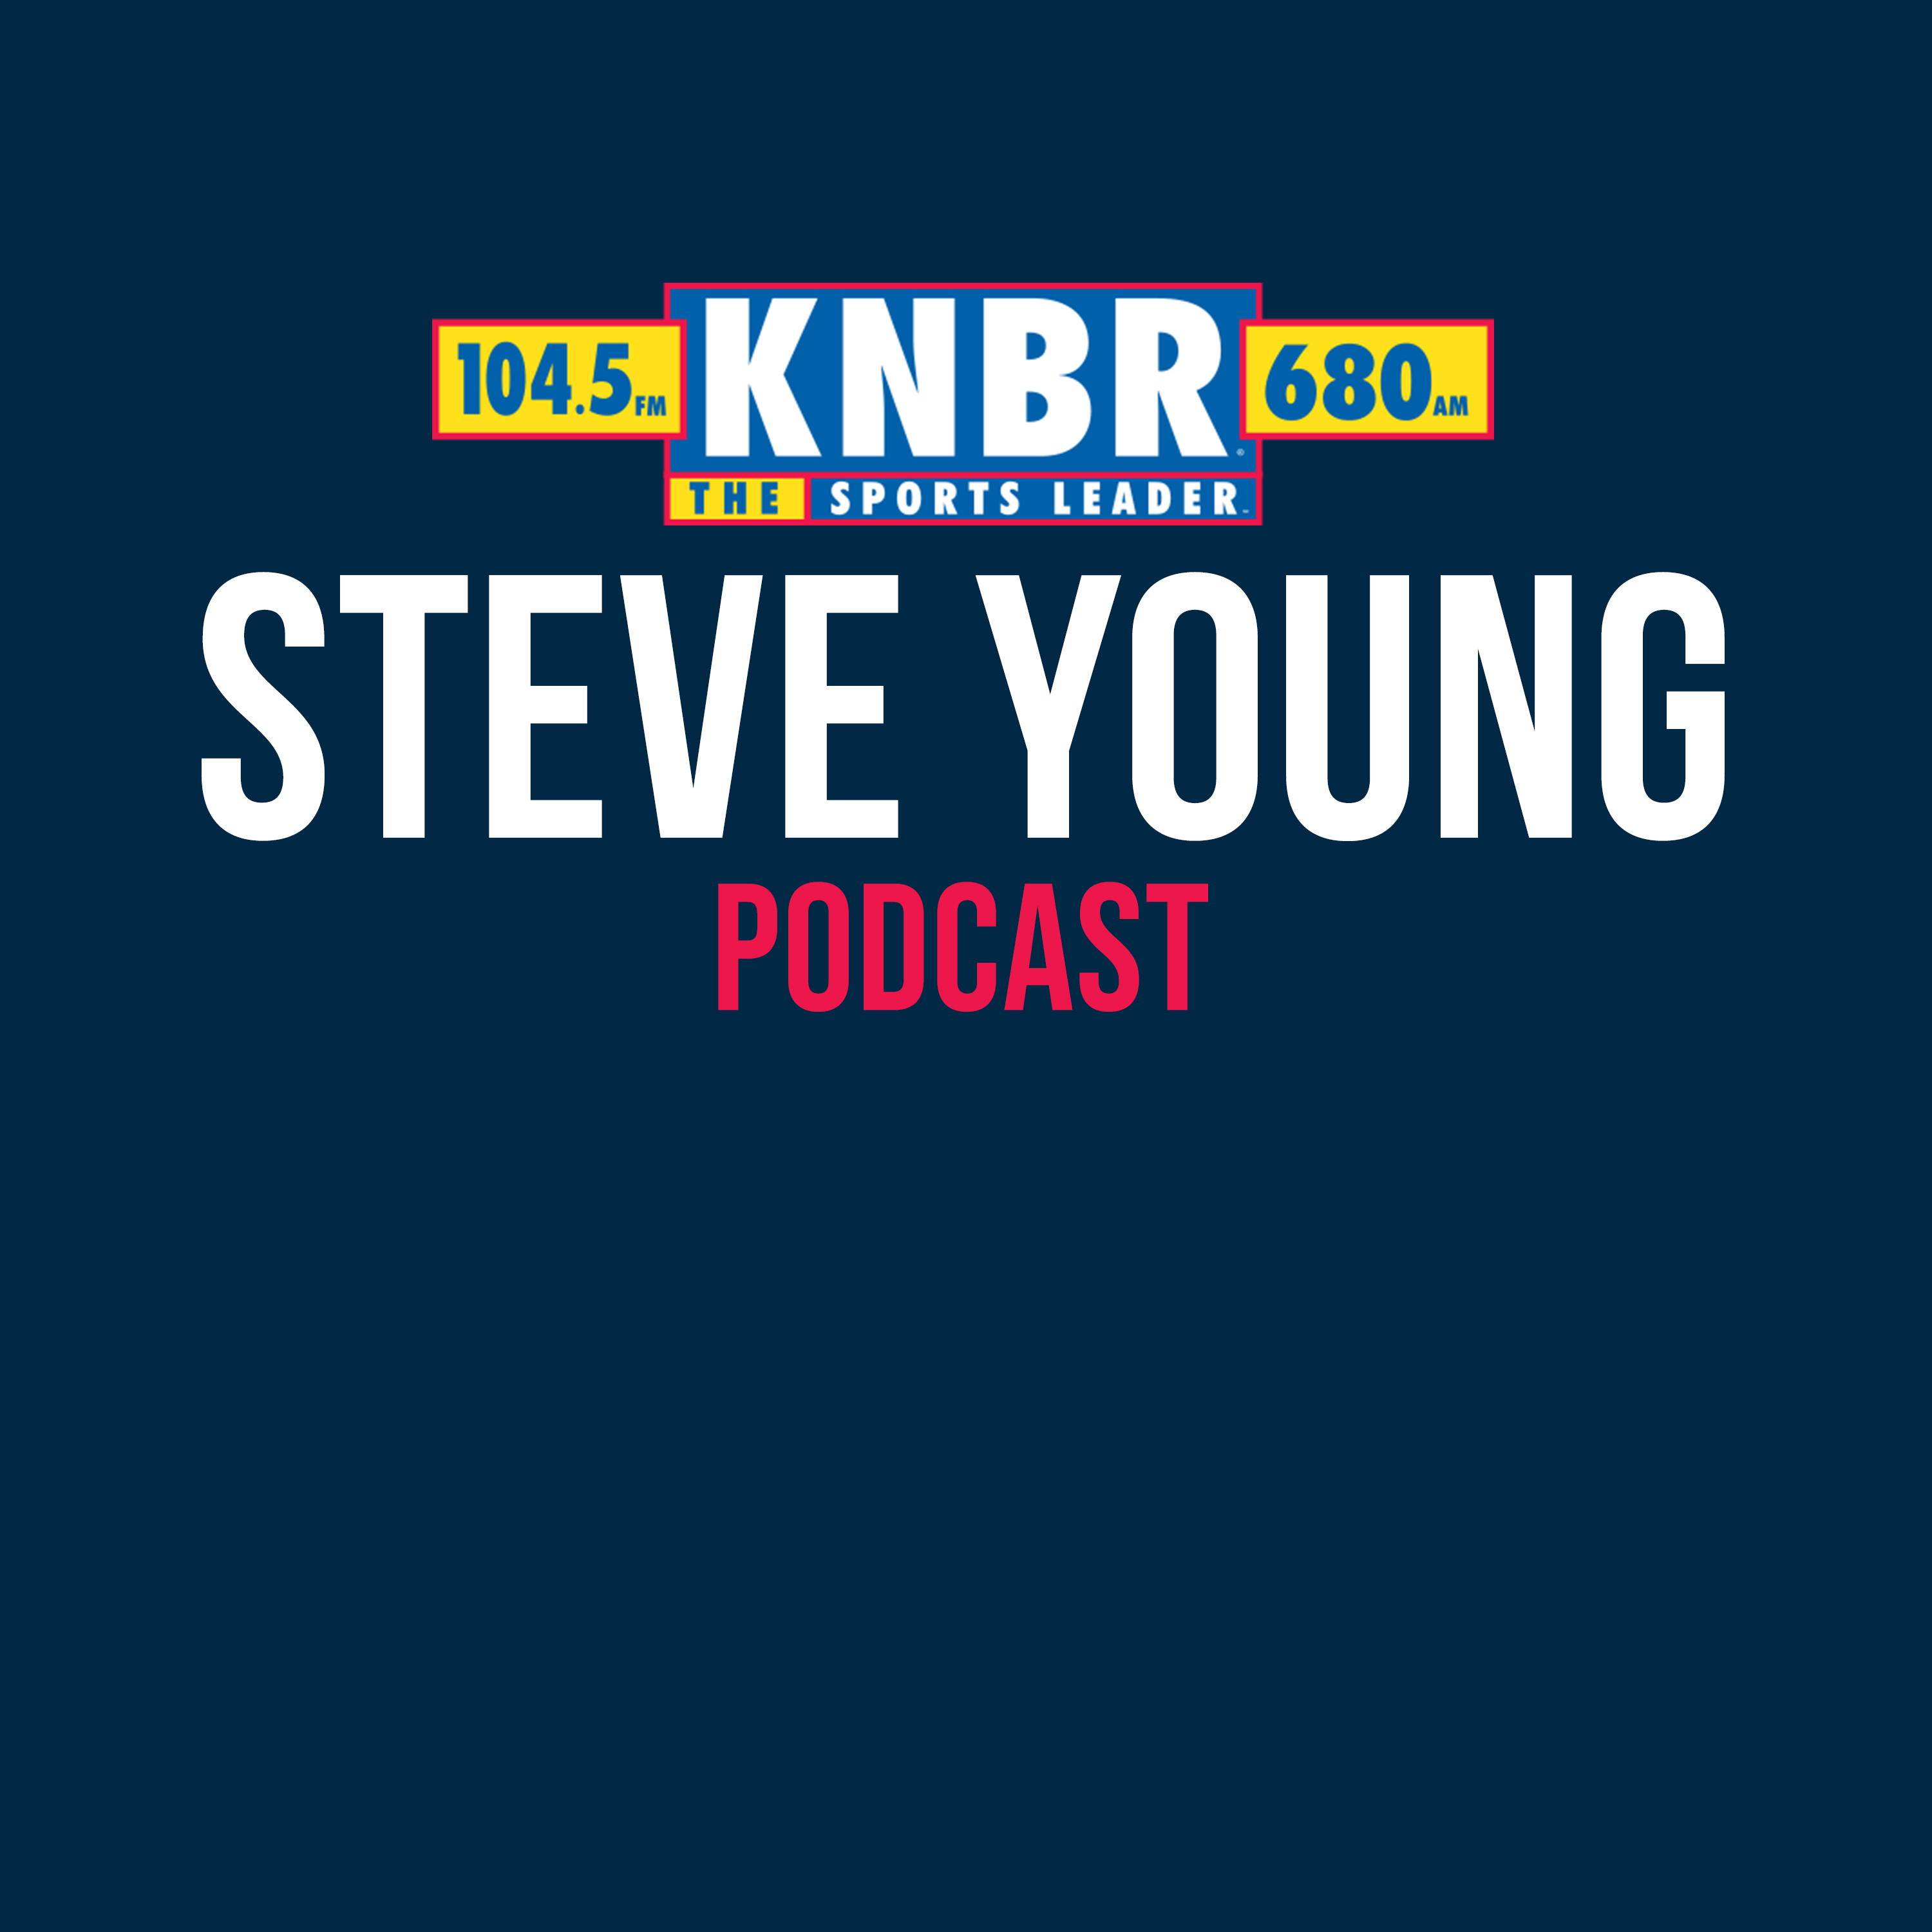 12-1 Steve Young reminisces about the time he wanted to fight George Seifert after being the only one benched in a bad loss